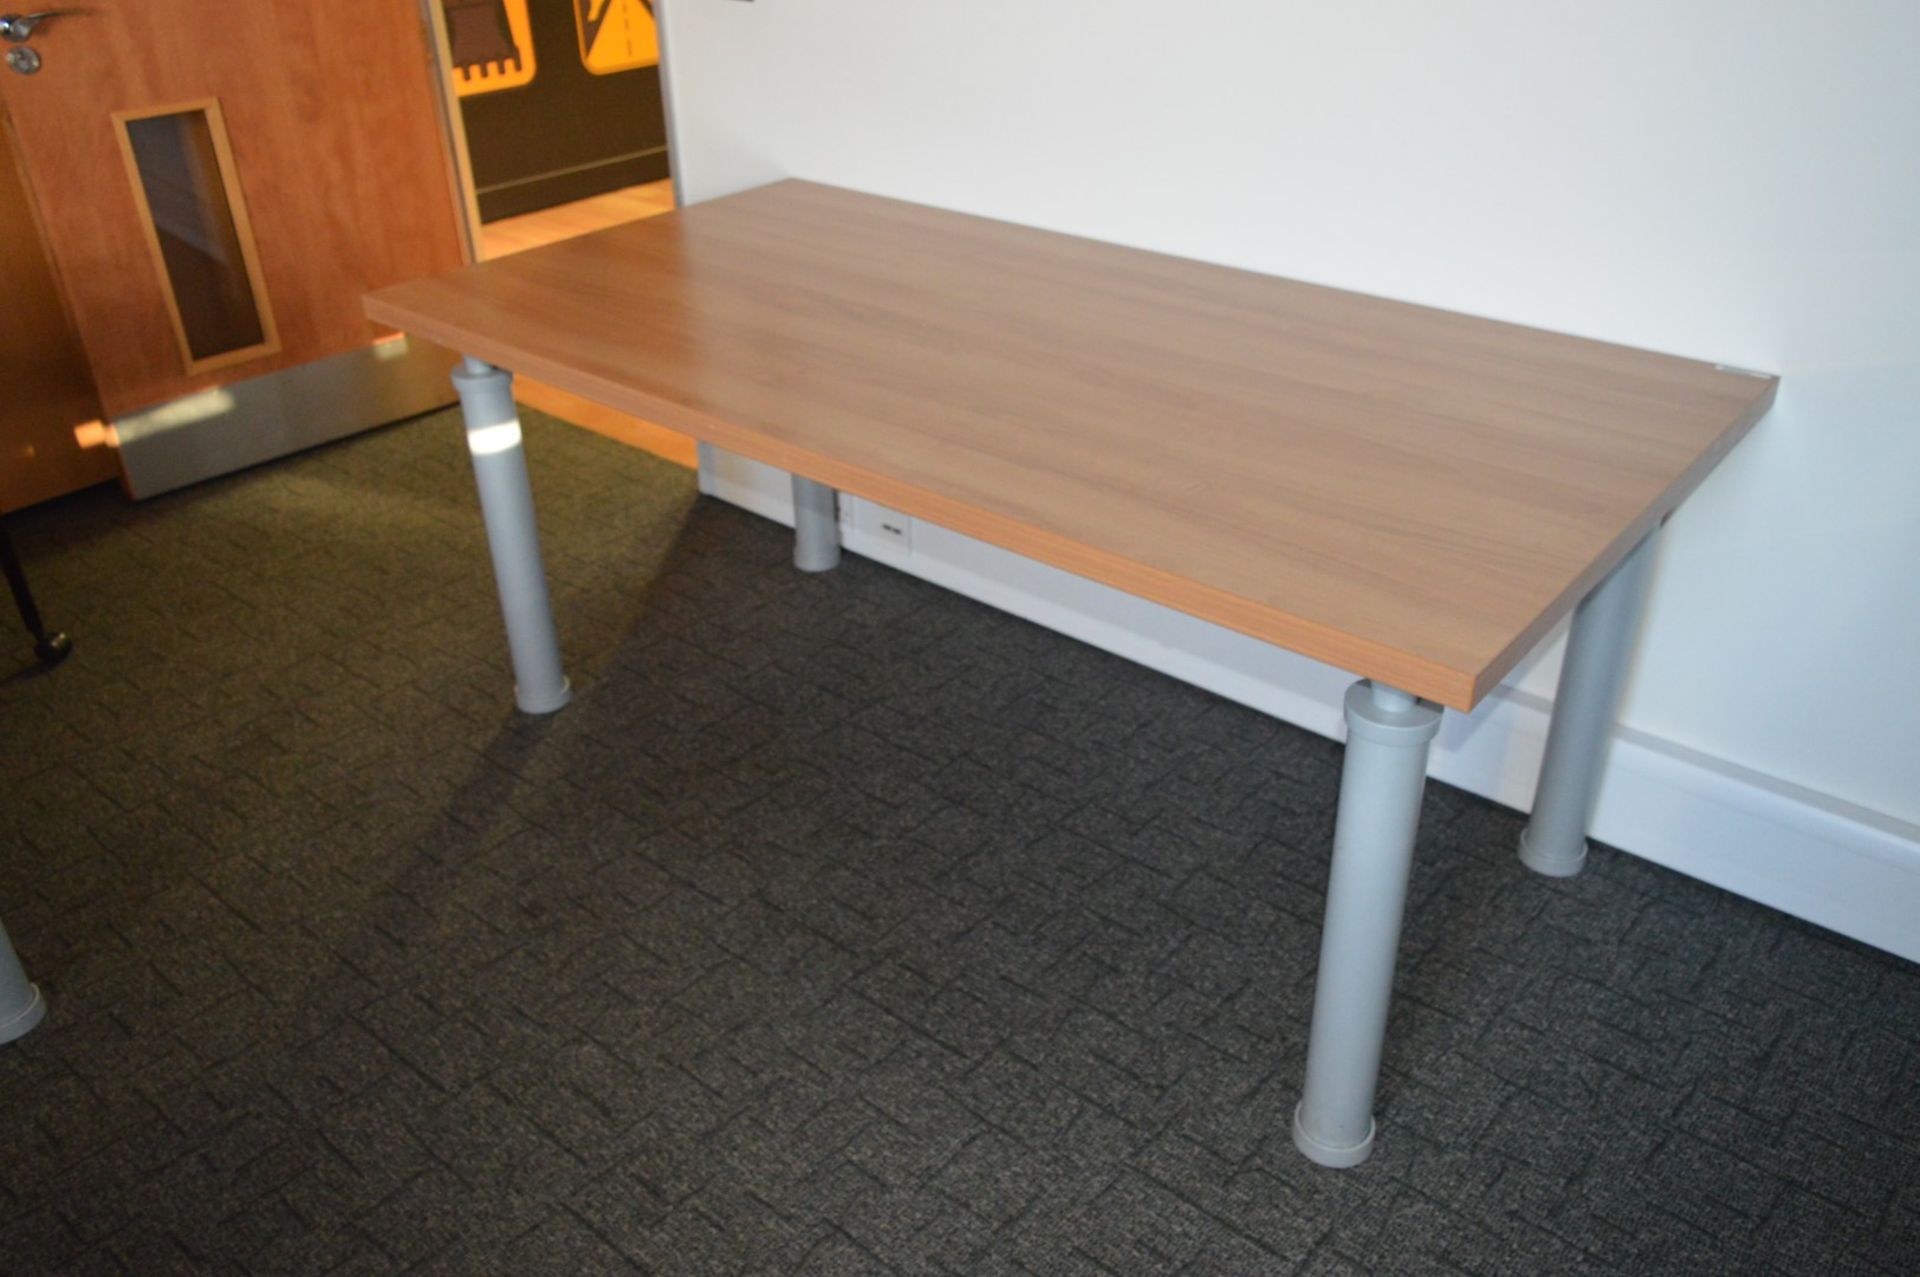 1 x Conference Office Table - Beech Finish - High Quality Office Furniture - H73.5 x W175 x D90 - Image 2 of 13